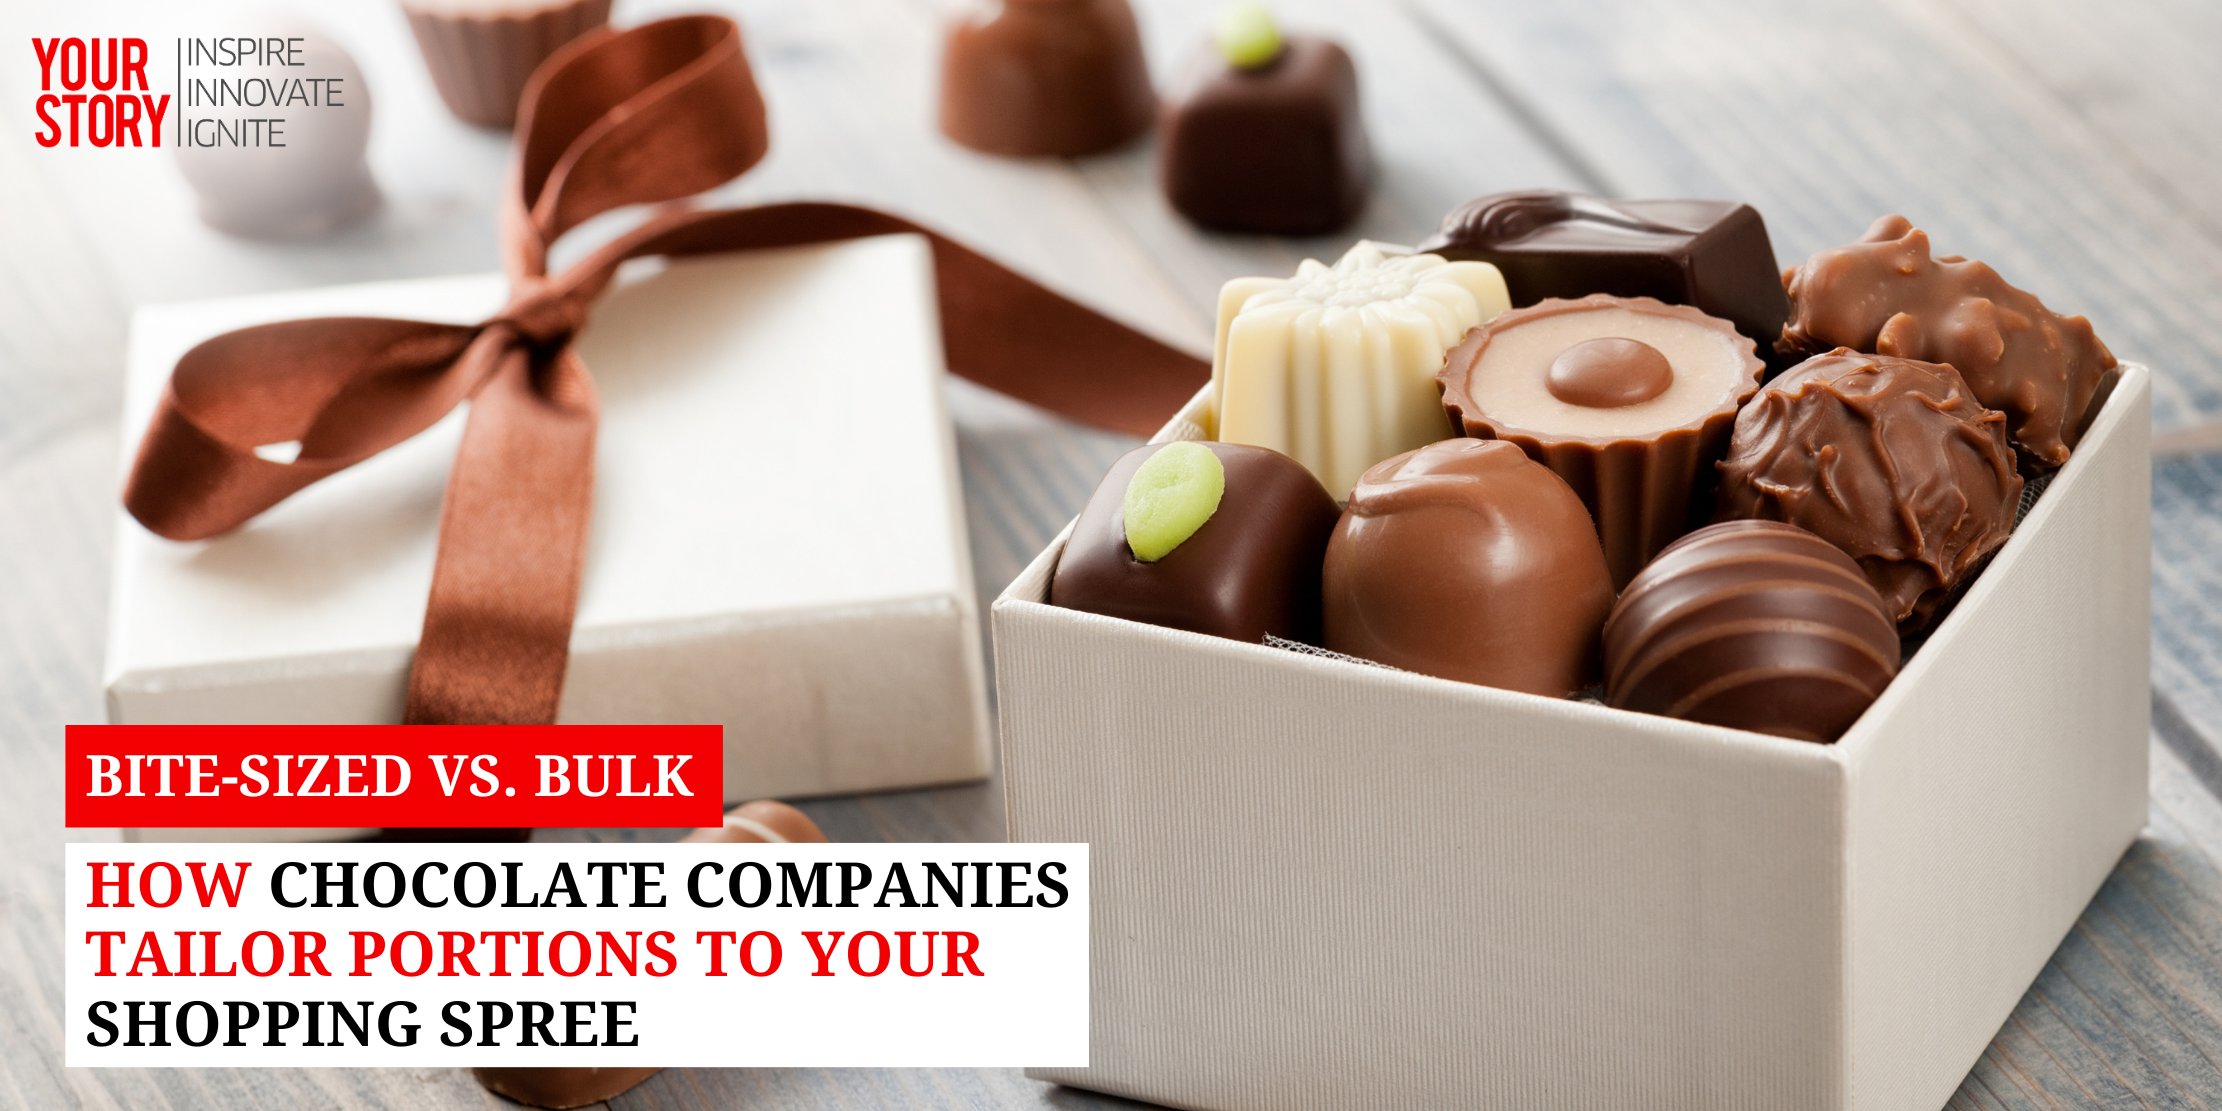 ⁠⁠Bite-Sized vs. Bulk: How Chocolate Companies Tailor Portions to Your Shopping Spree